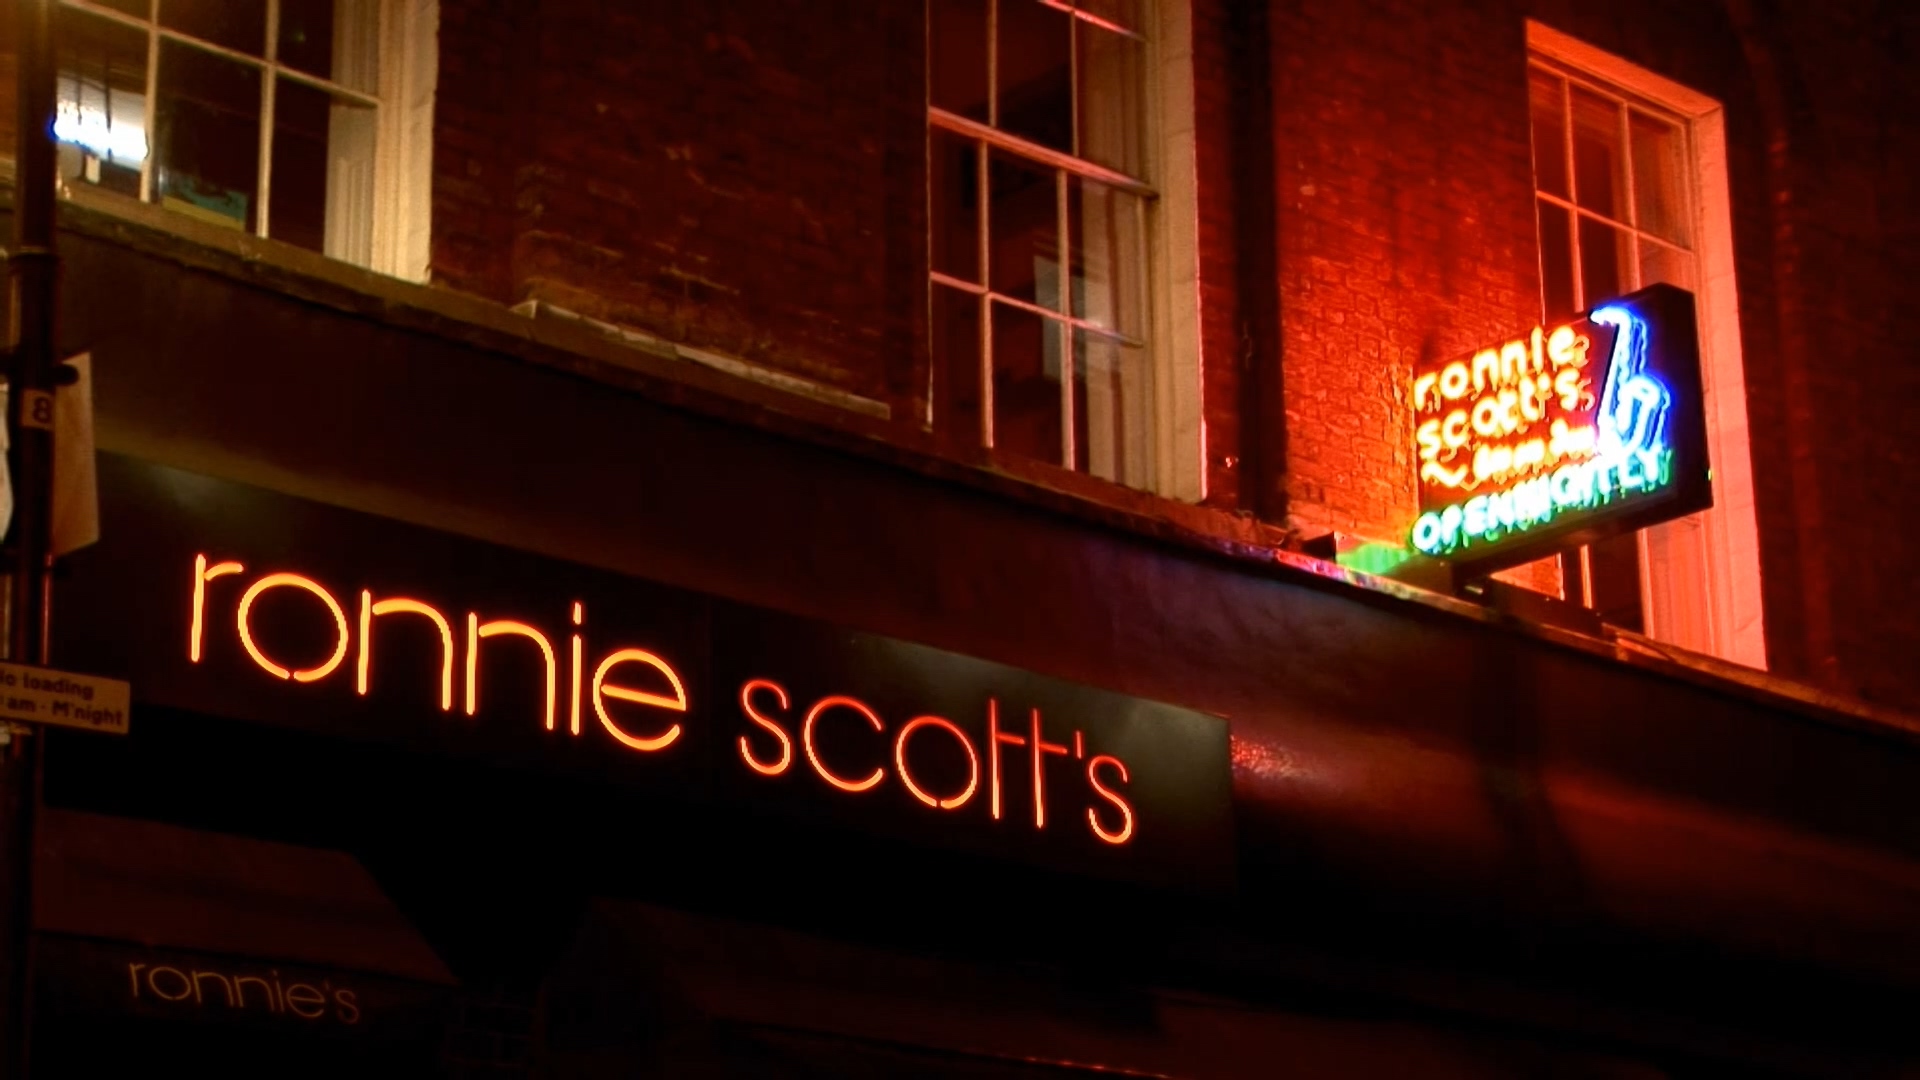 Perfoming This Week - Live at Ronnie Scott's_20190806_191756.774.jpg